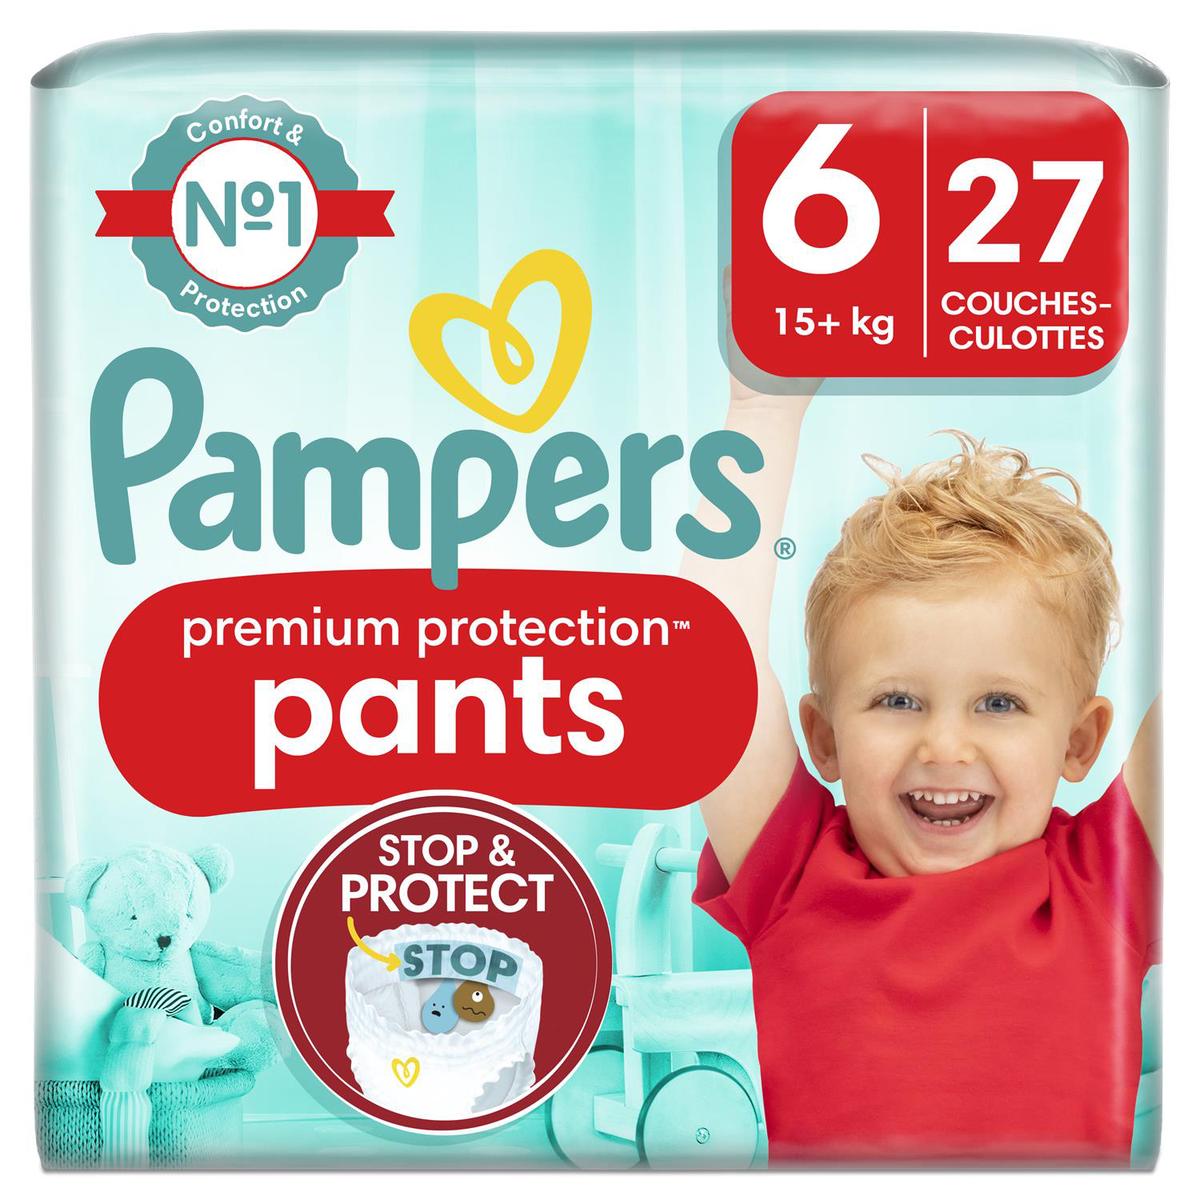 Pack 62 couches PAMPERS Pants Premium Protection Taille 6 - 15+ KG